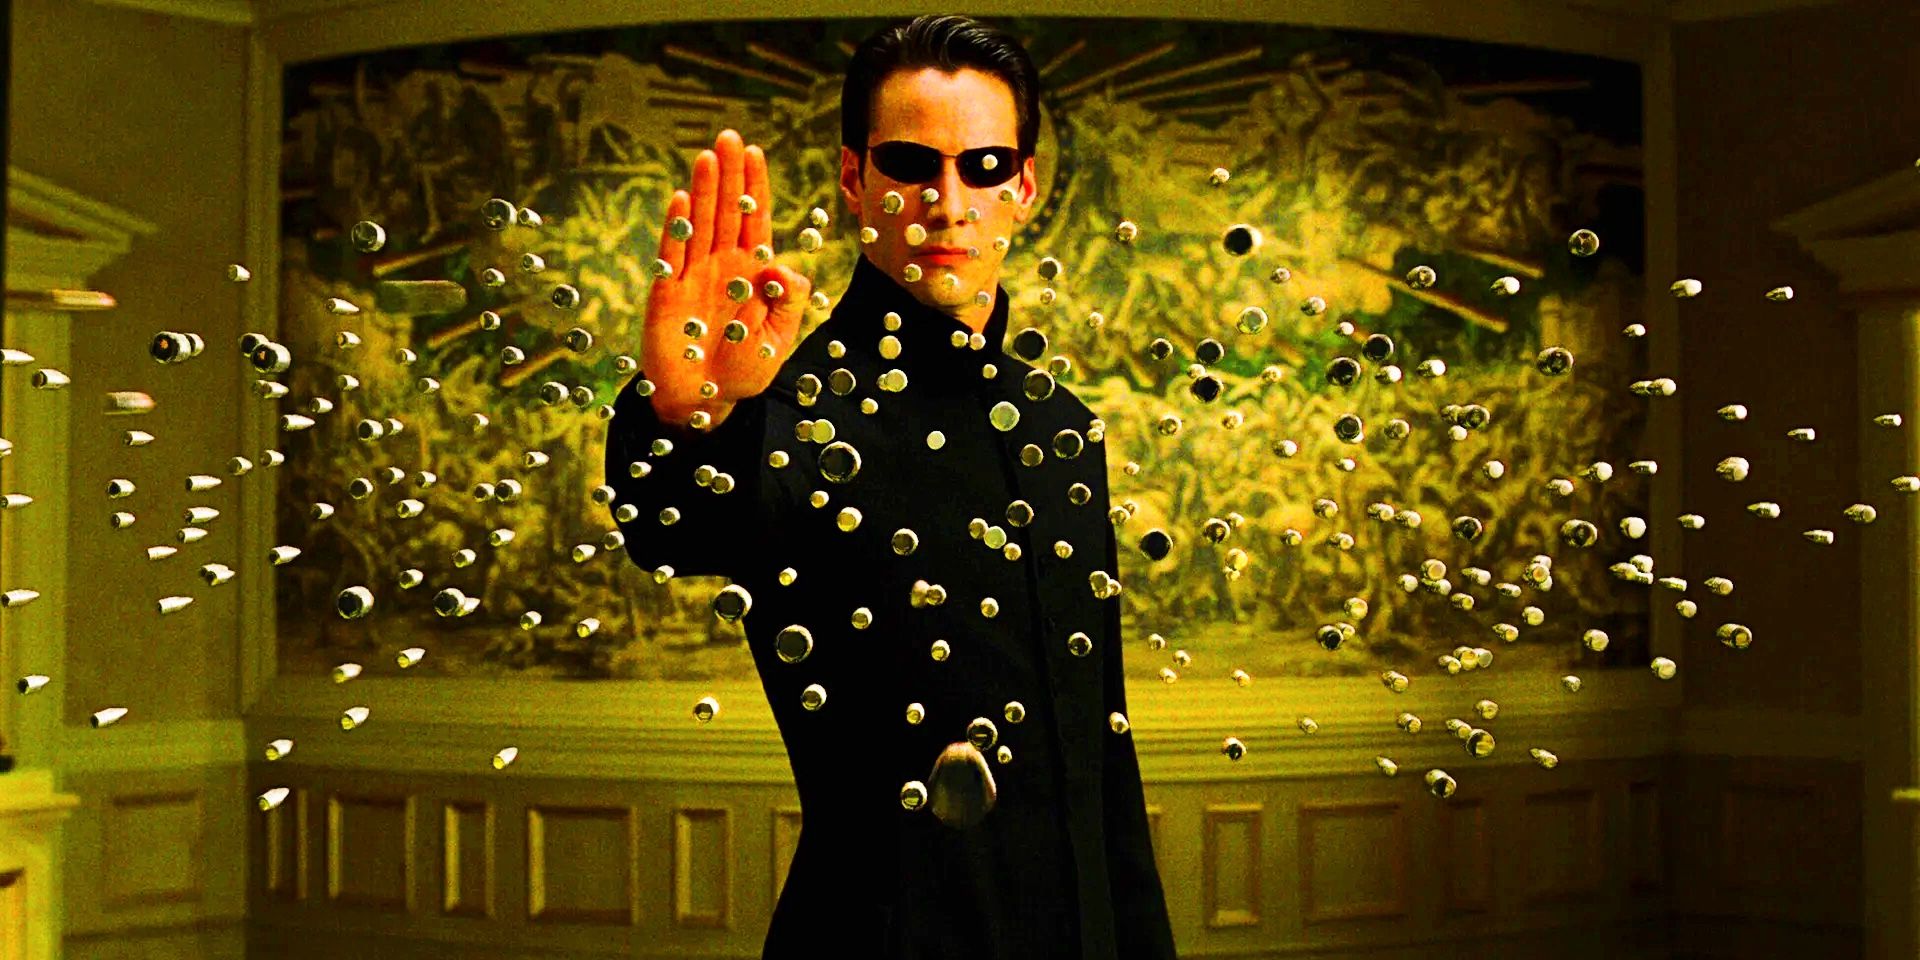 Neo with his hand up in The Matrix